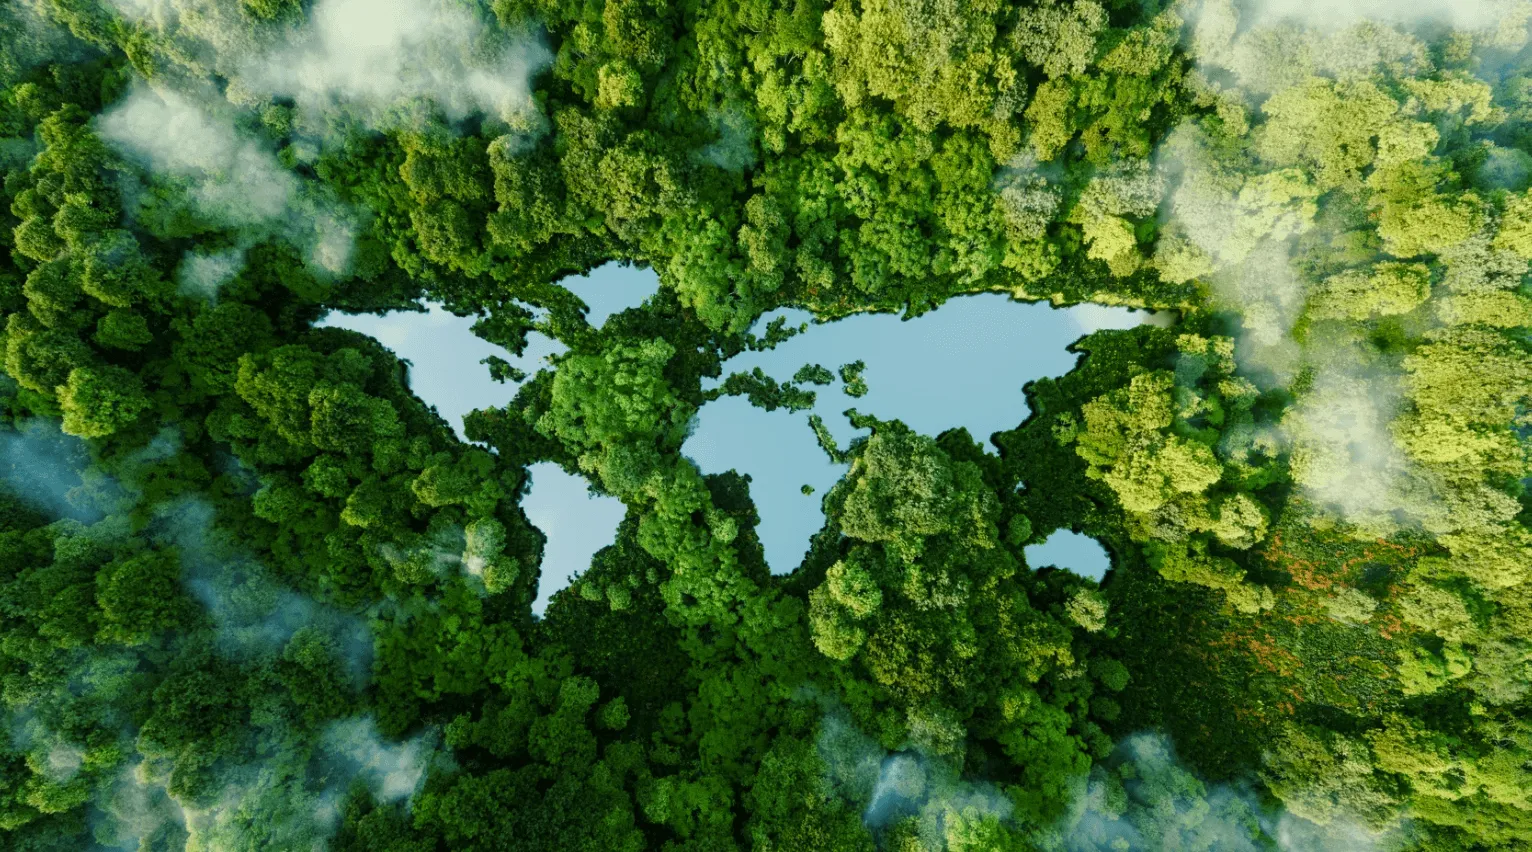 a green forest with lakes the shape of the world